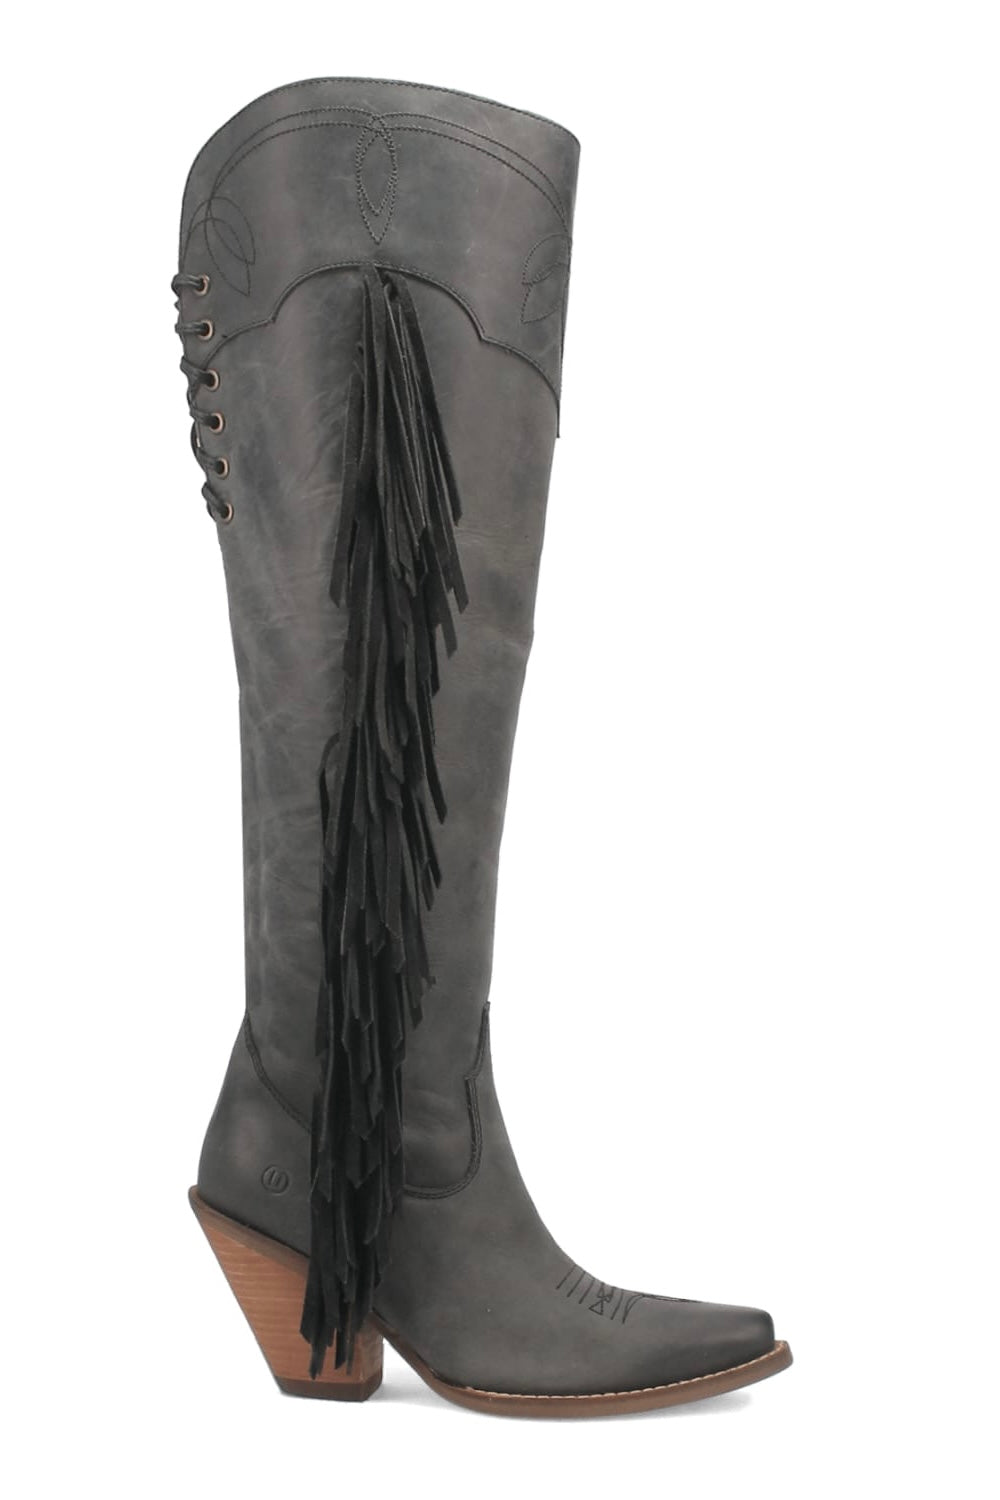 Sky High Leather Boot in Black